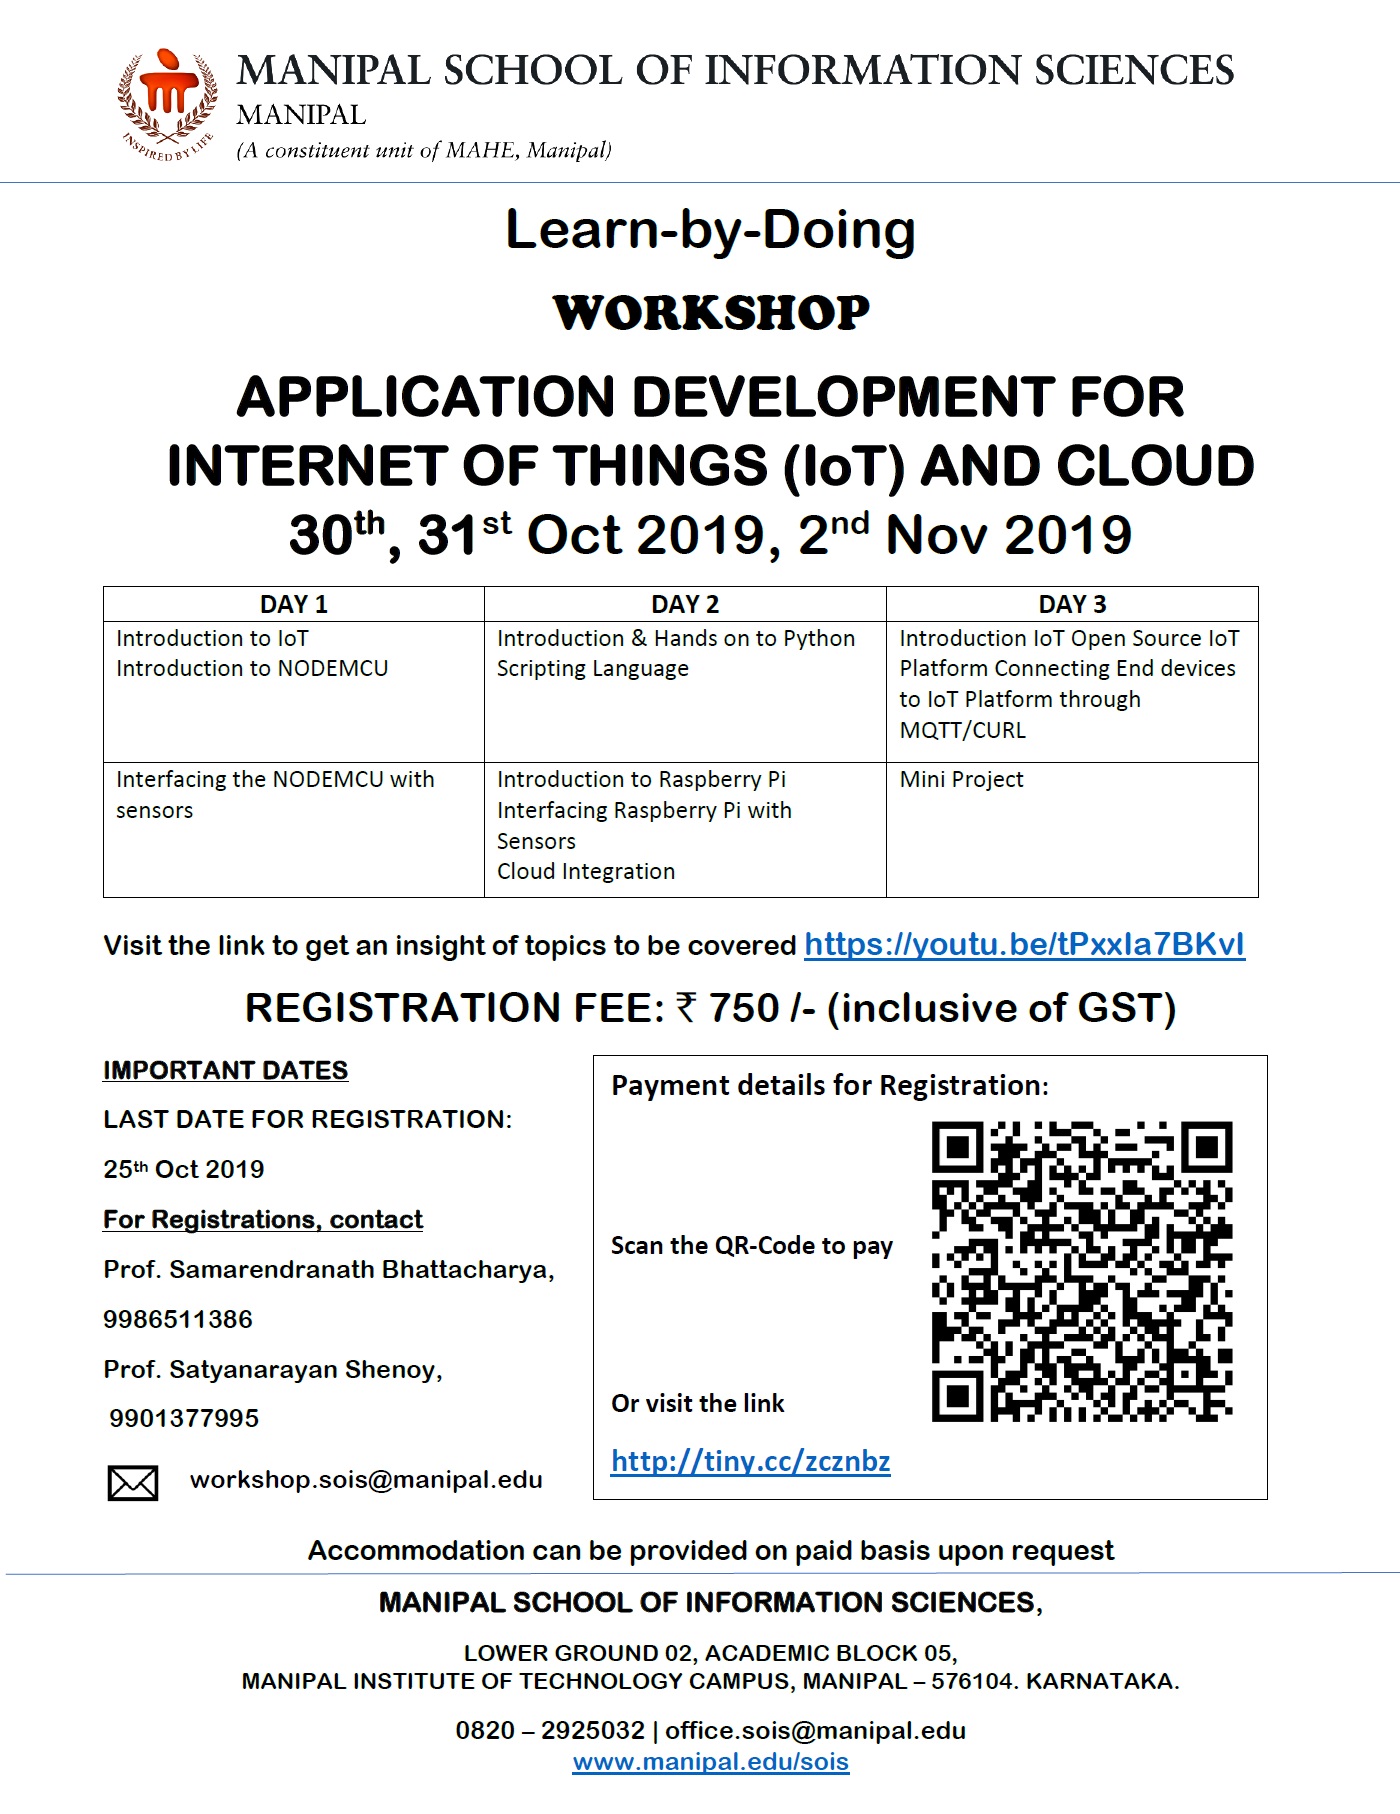 Lear-by-Doing Workshop on Application Development for IoT and Cloud using Raspberry Pi 2019